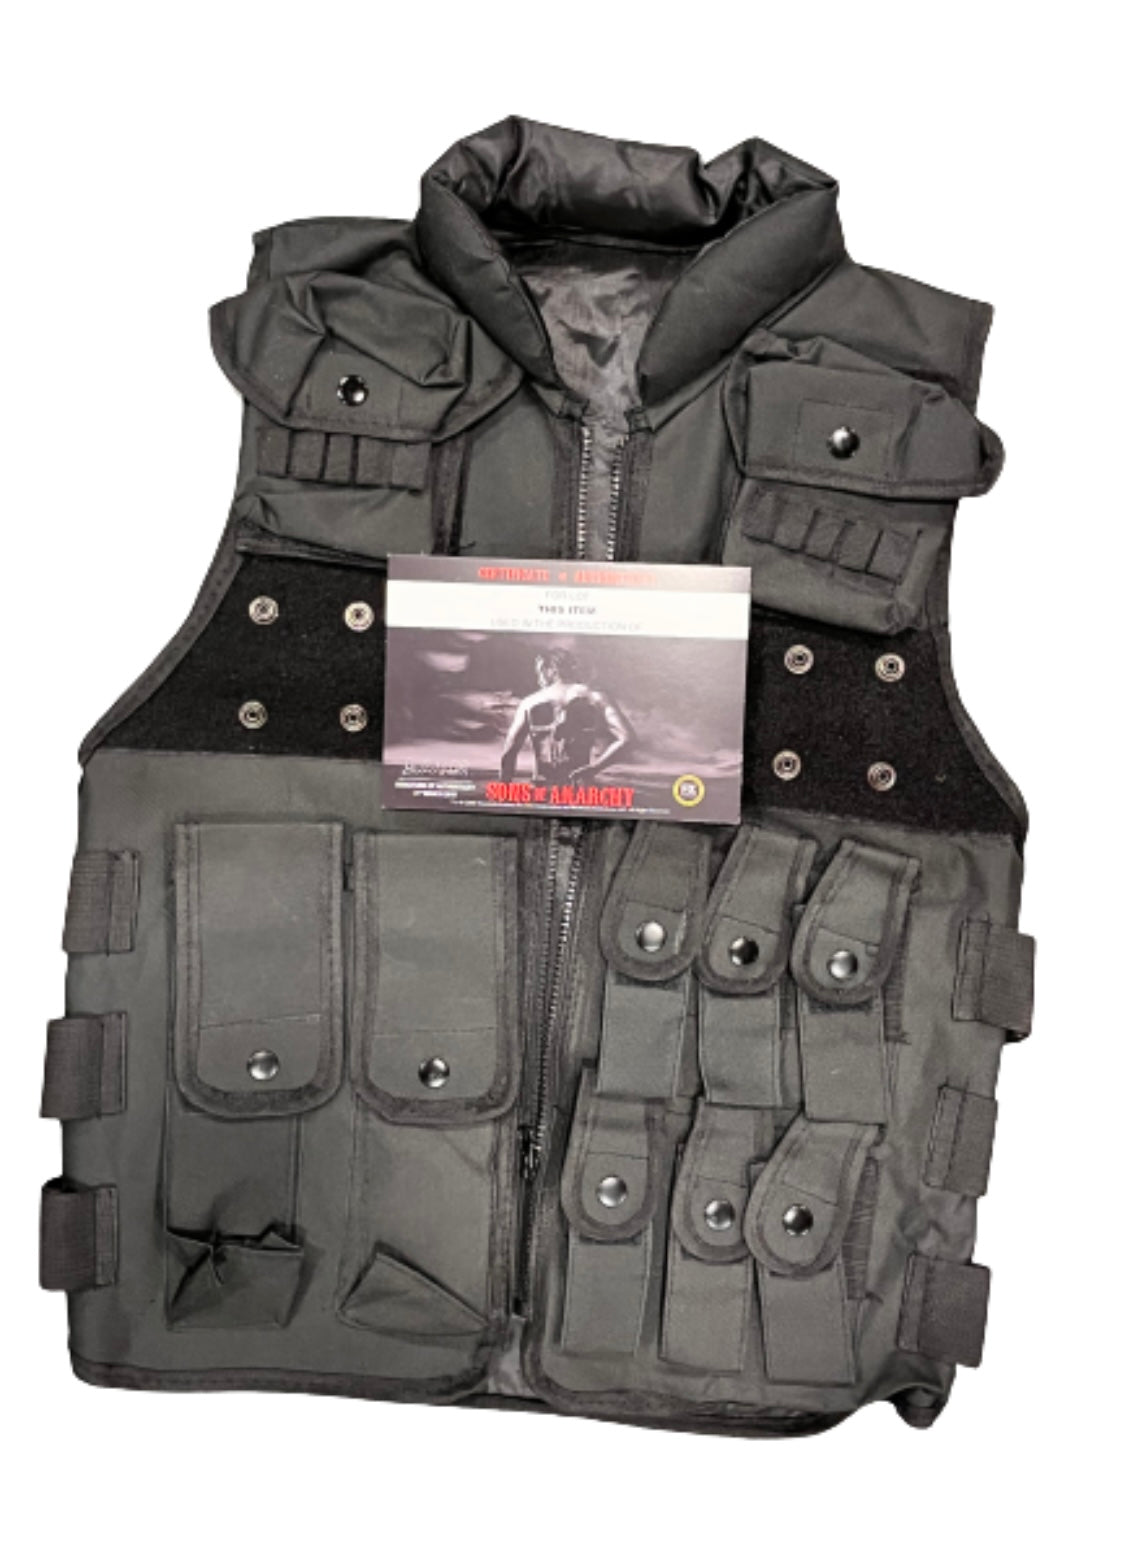 SONS OF ANARCHY: Opie’s Tactical Vest